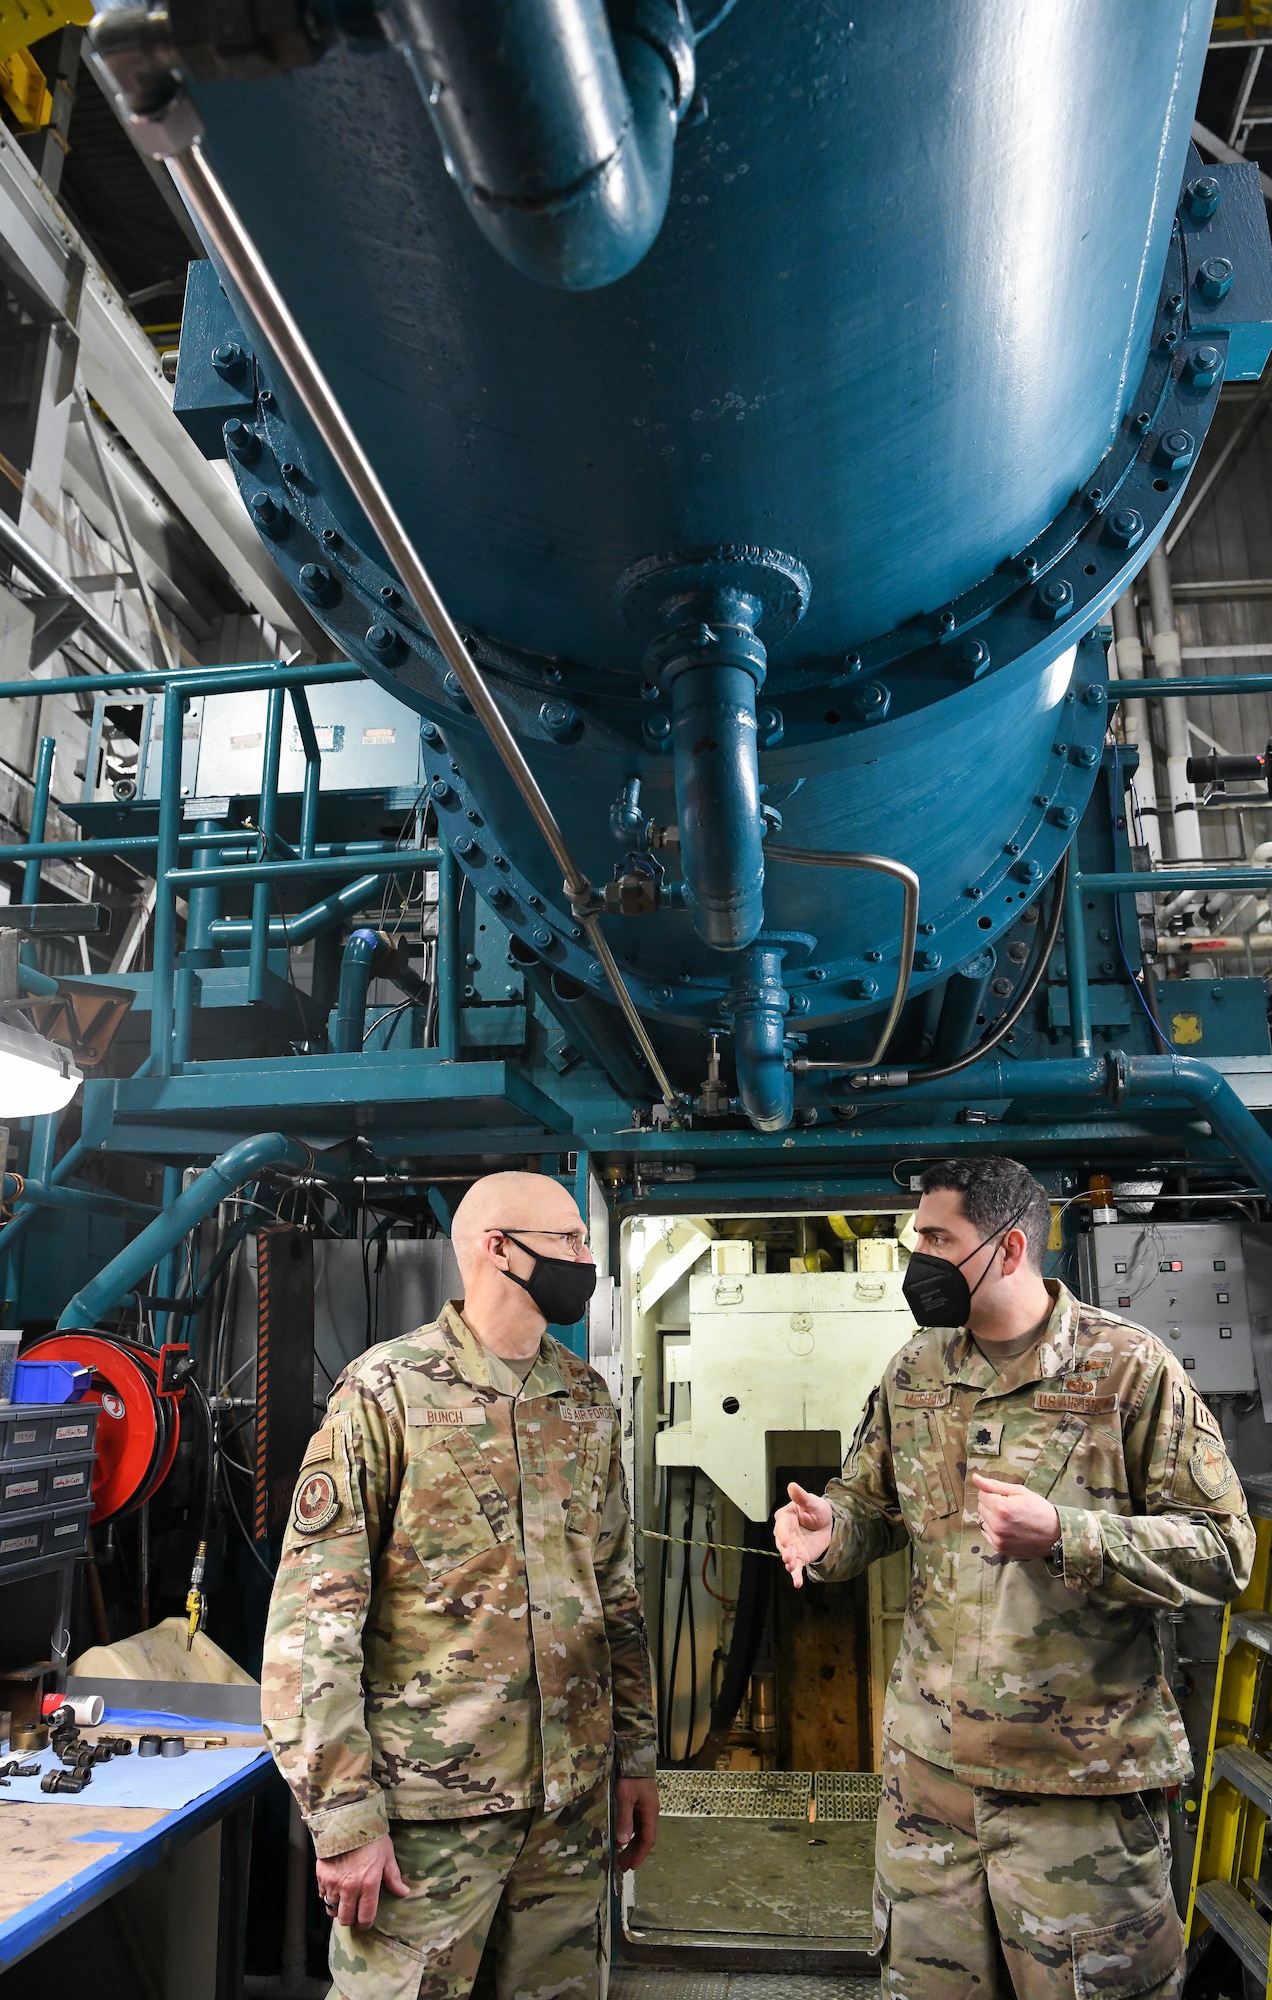 Lt. Col. John McShane, chief, Aerodynamics Test Branch, Test Division, Arnold Engineering Development Complex (AEDC), speaks with Gen. Arnold W. Bunch Jr., commander, Air Force Materiel Command, while showing him around Tunnel B of the von Kármán Gas Dynamics Facility at Arnold Air Force Base, Tenn., headquarters of AEDC, Jan. 27, 2022. (U.S. Air Force photo by Jill Pickett)